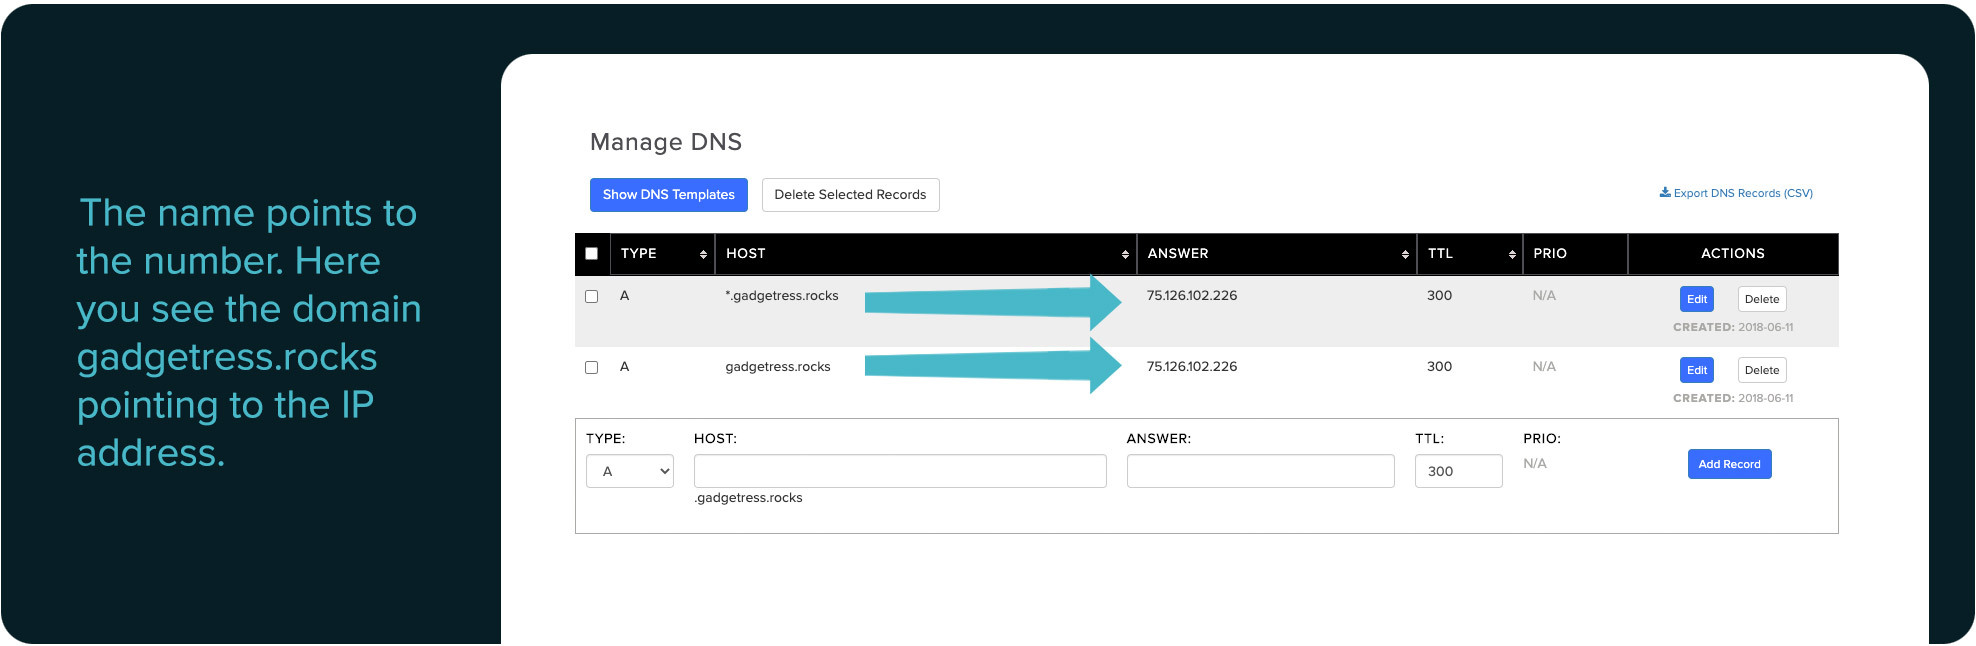 DNS management A records example